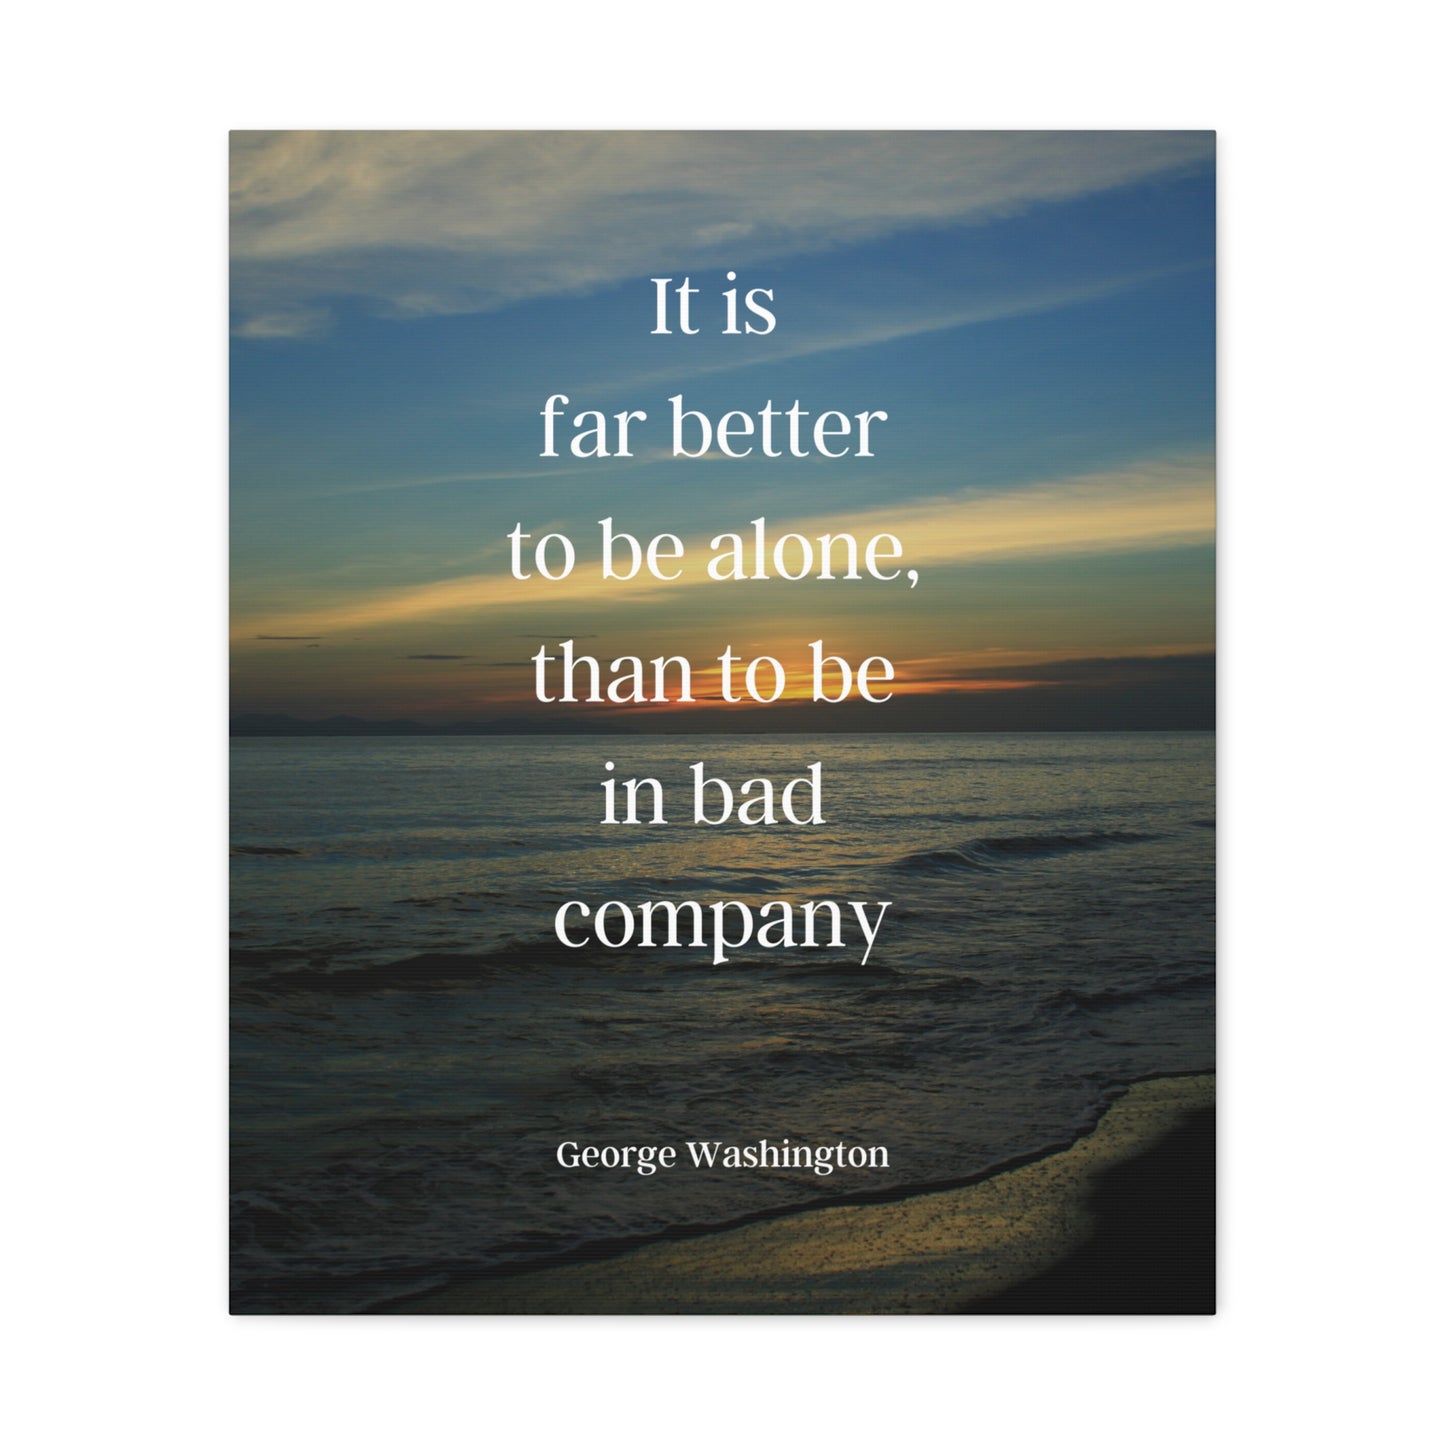 George Washington Quote 1, AI Canvas Art, 1st President of the United States, Ocean Art, Sunset, Nature, Political Art, Canvas Prints, Presidential Quotes, Inspirational Quotes